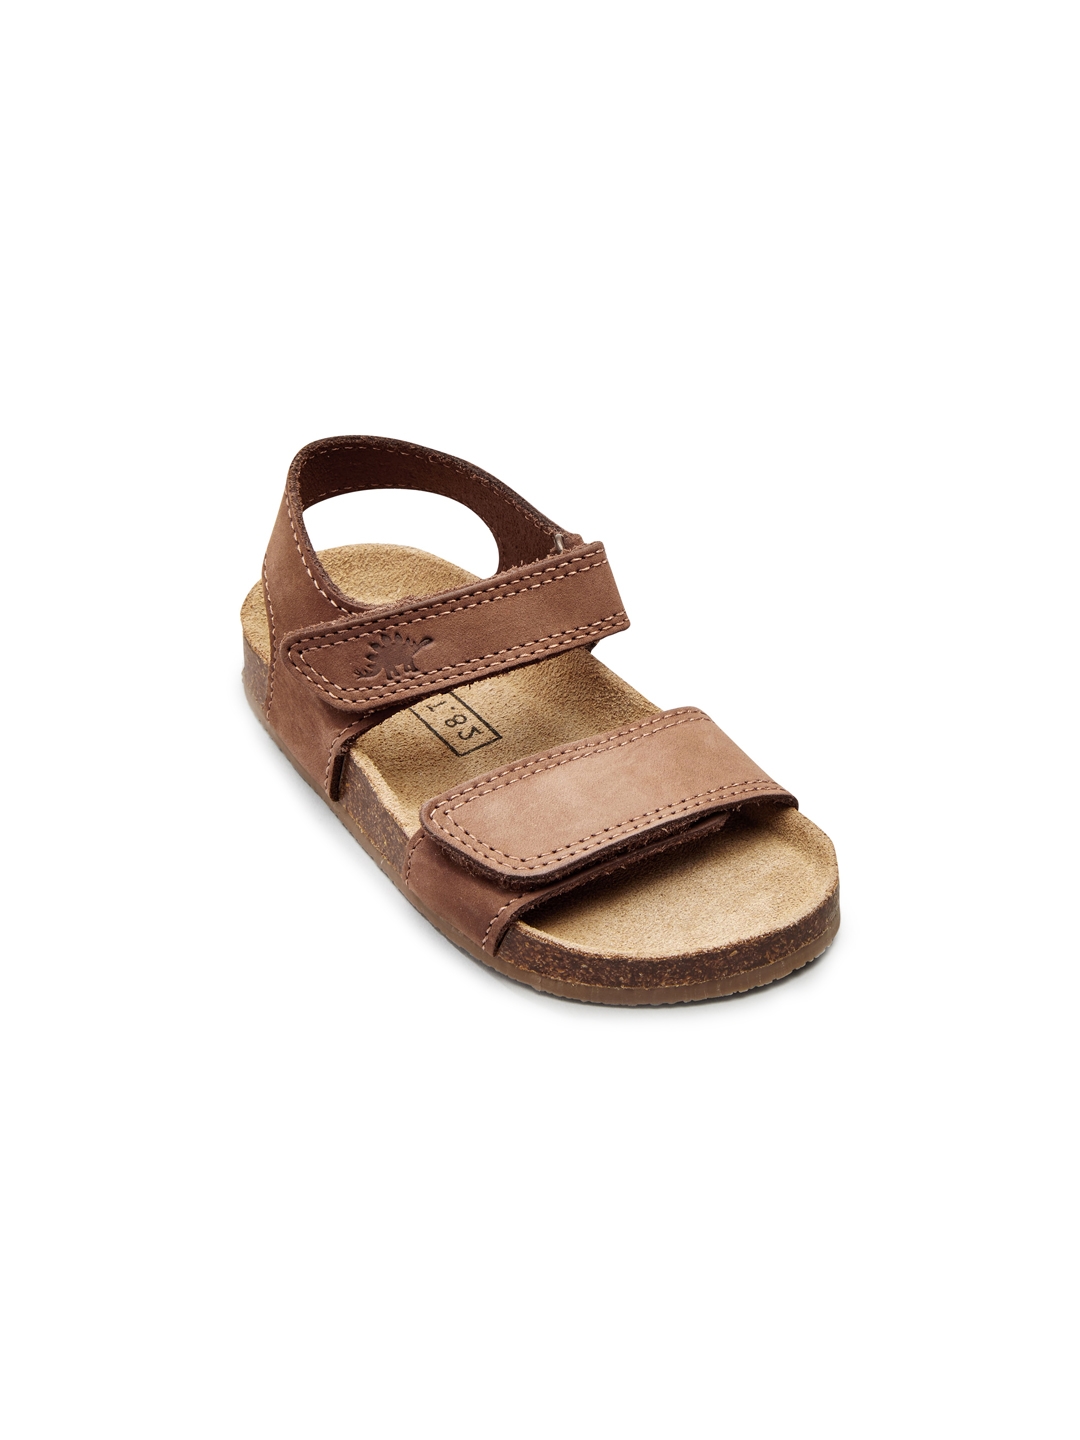 Buy Tan Sandals for Boys by Buckled Up Online | Ajio.com-tmf.edu.vn